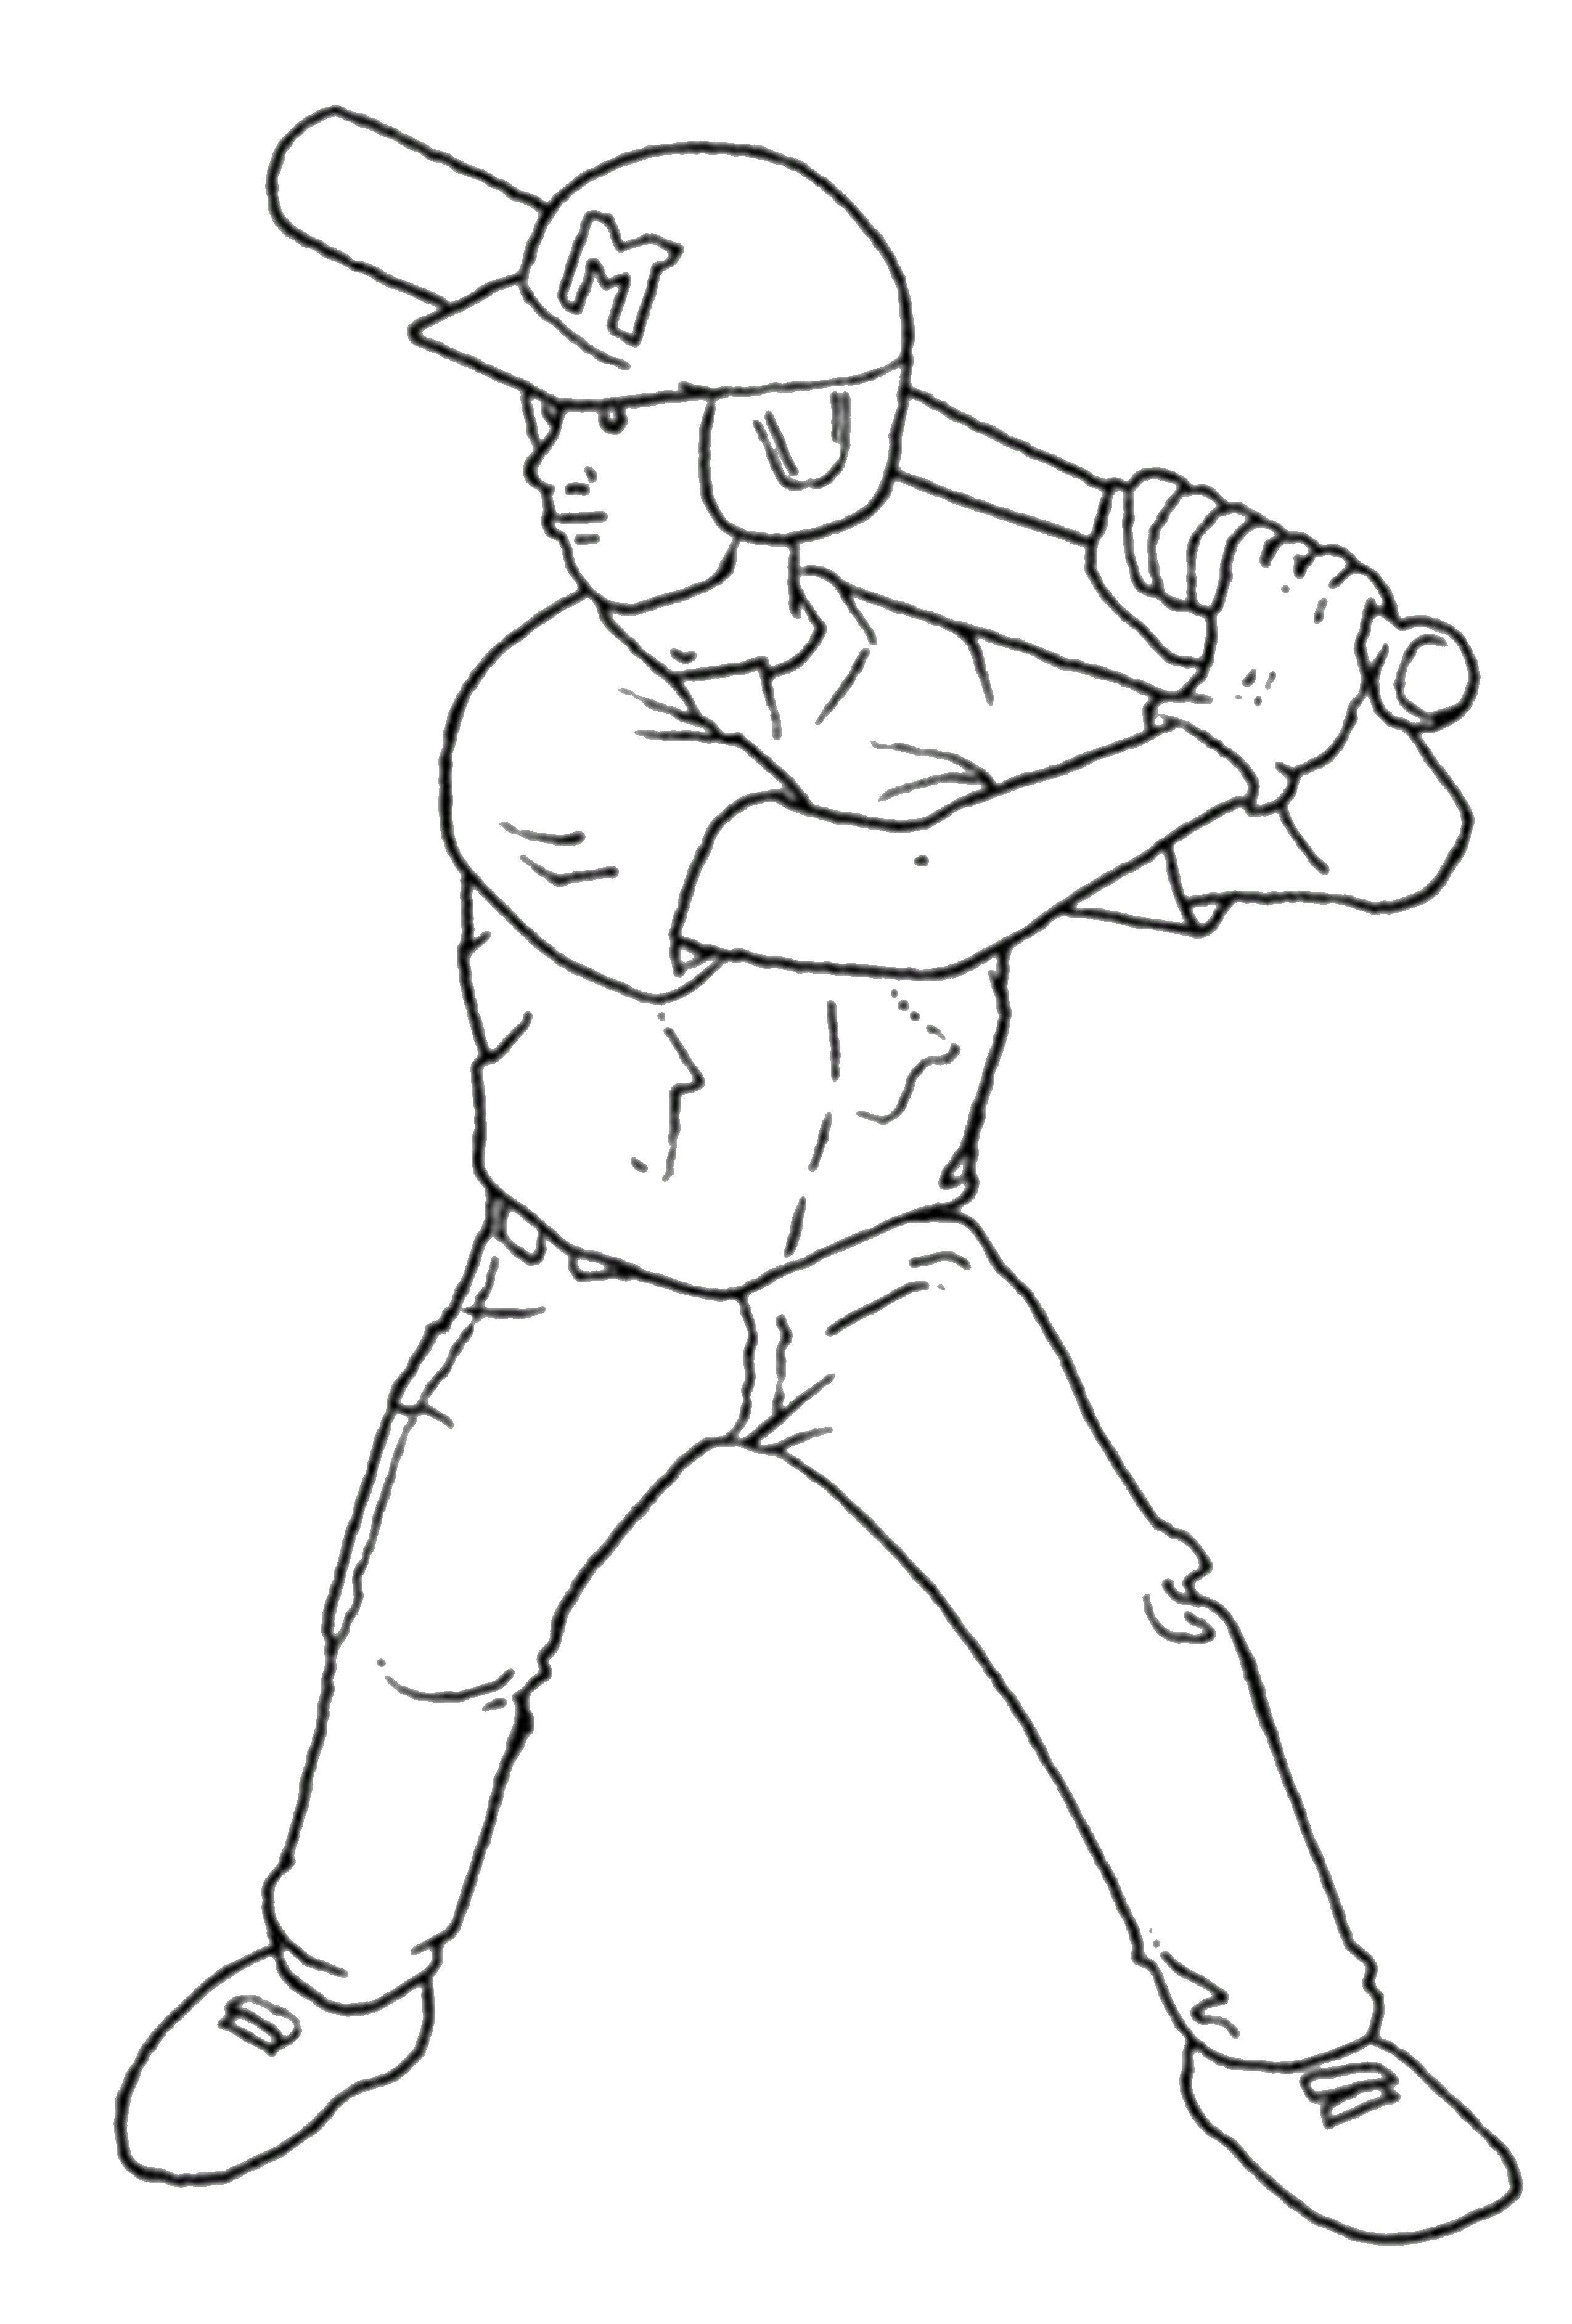 Coloring Baseball player. Category For boys . Tags:  for boys, sports, baseball.